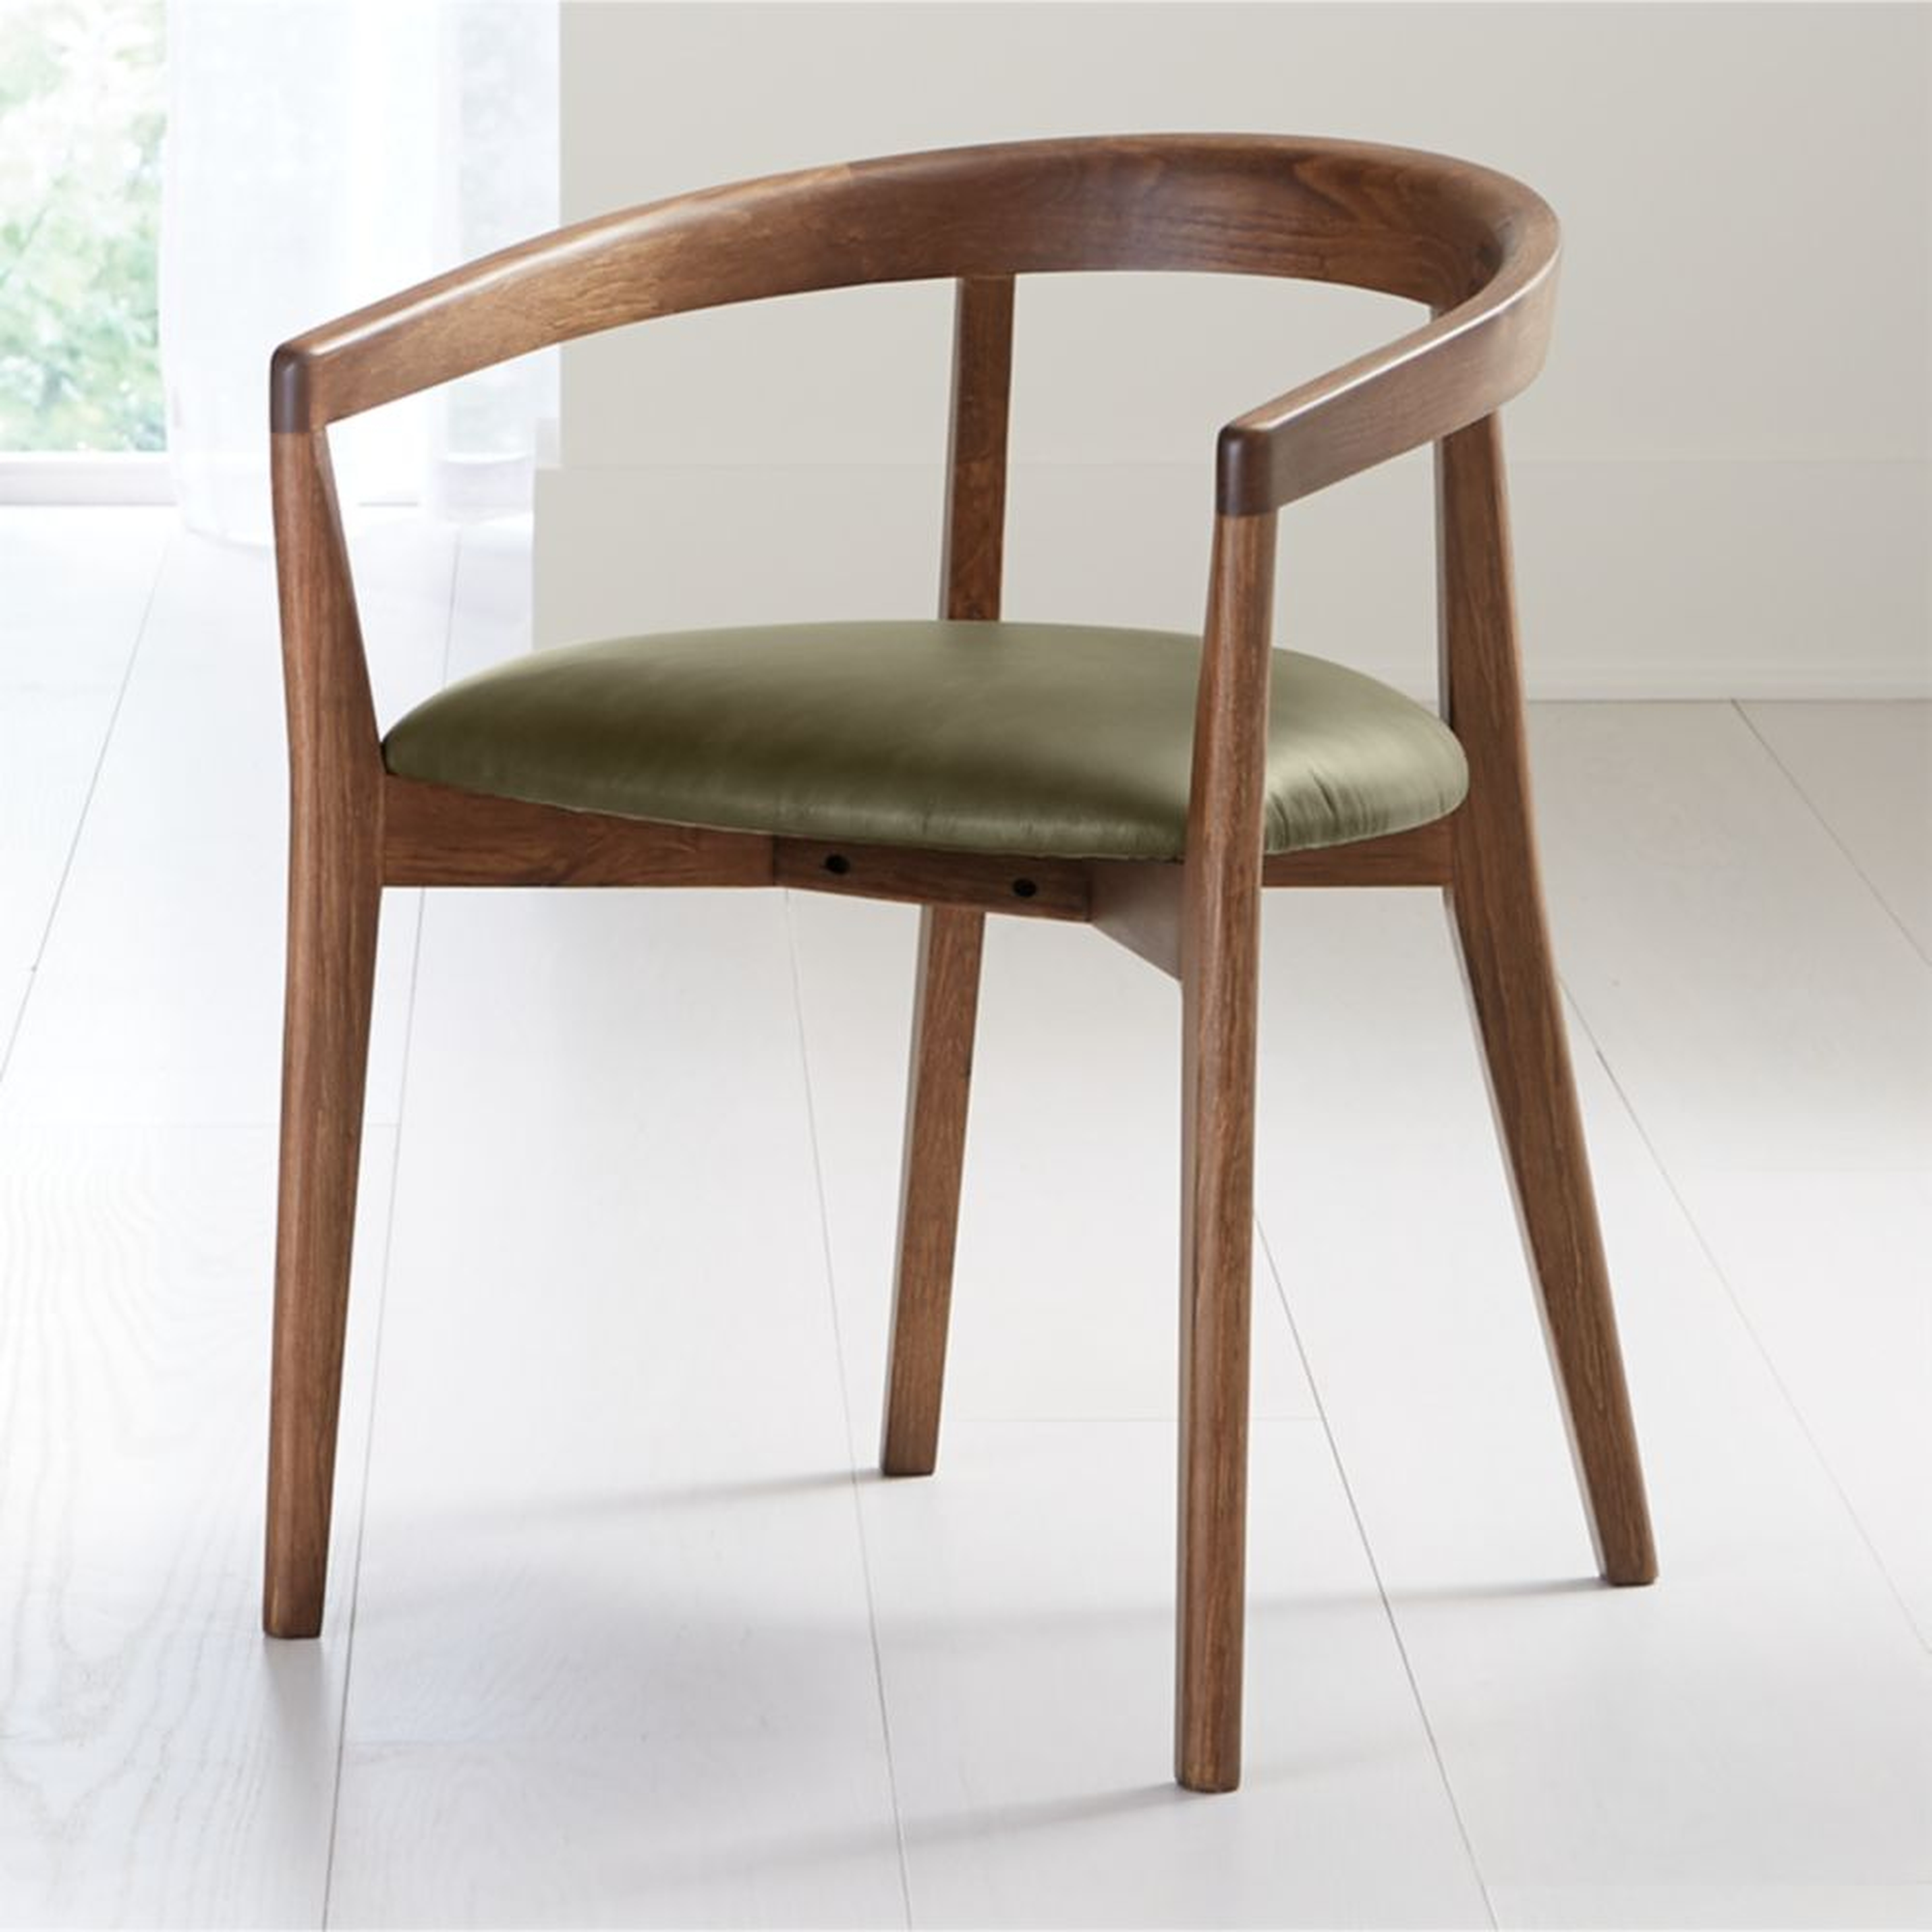 Cullen Shiitake Olive Round Back Dining Chair - Crate and Barrel